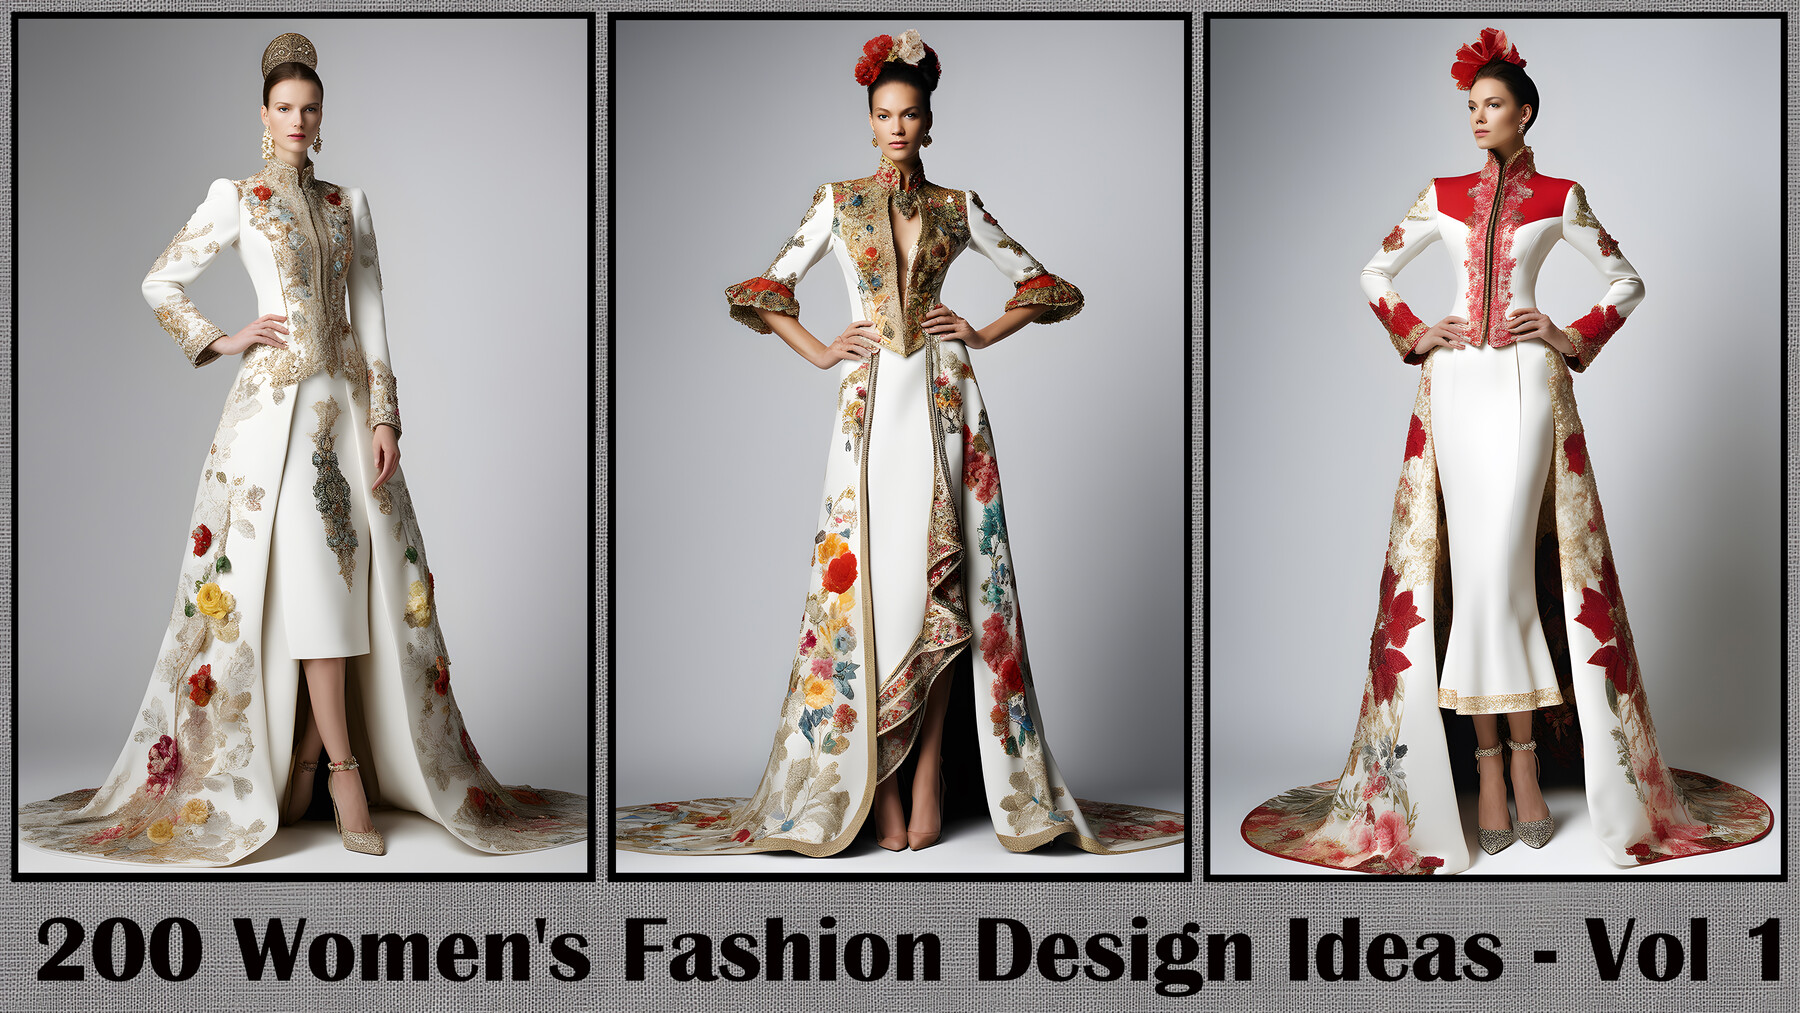 Ancient inspirations in fashion design 